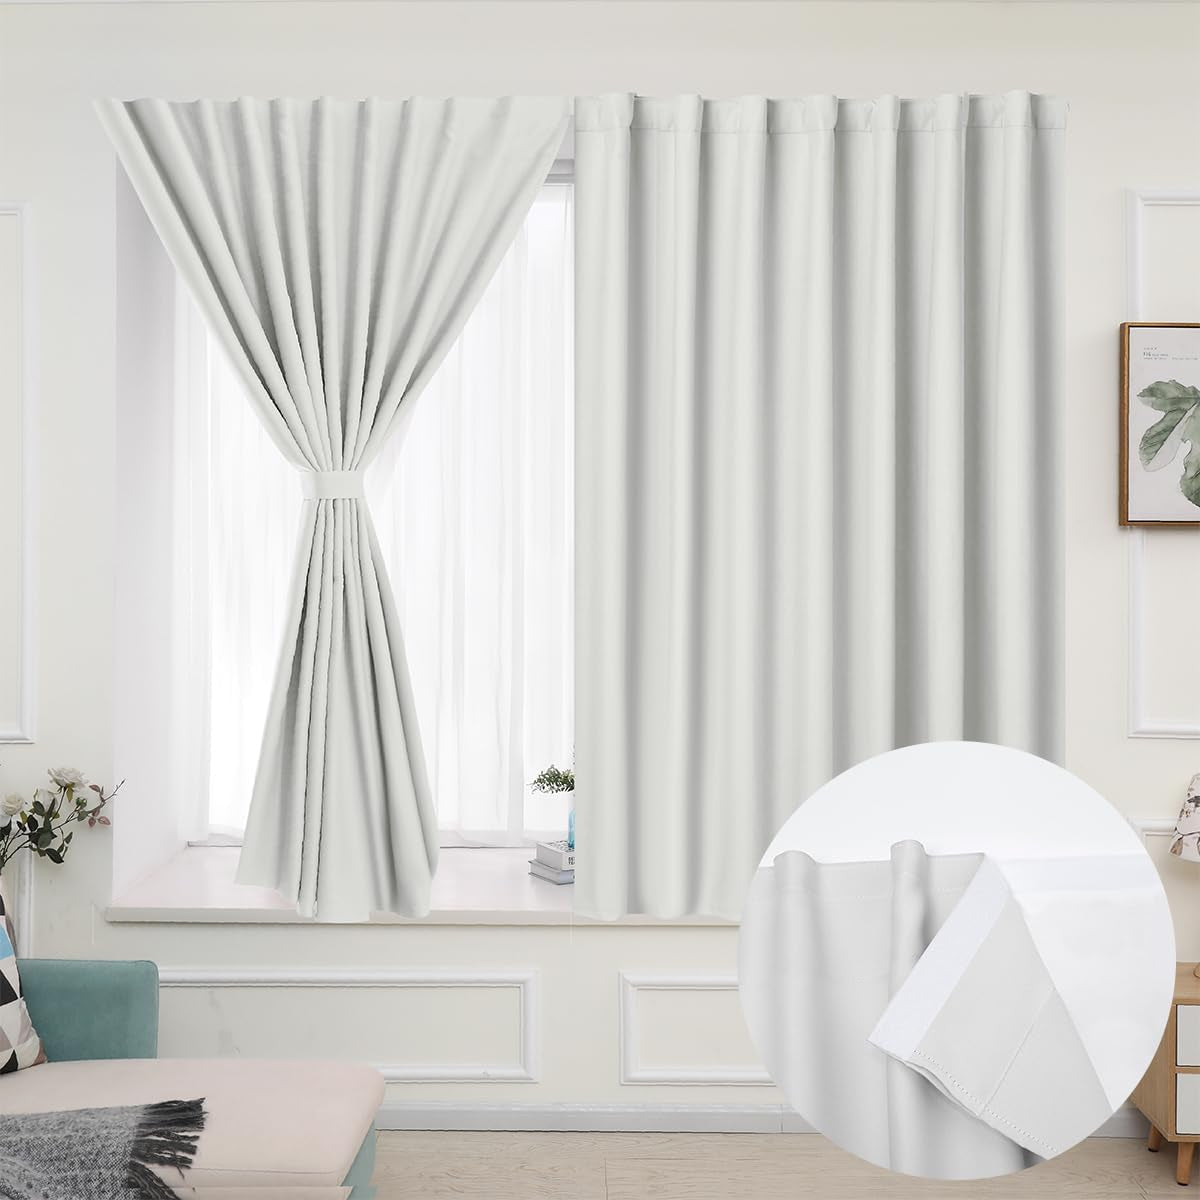 Muamar 2Pcs Blackout Curtains Privacy Curtains 63 Inch Length Window Curtains,Easy Install Thermal Insulated Window Shades,Stick Curtains No Rods, Black 42" W X 63" L  Muamar White 42"W X 63"L 